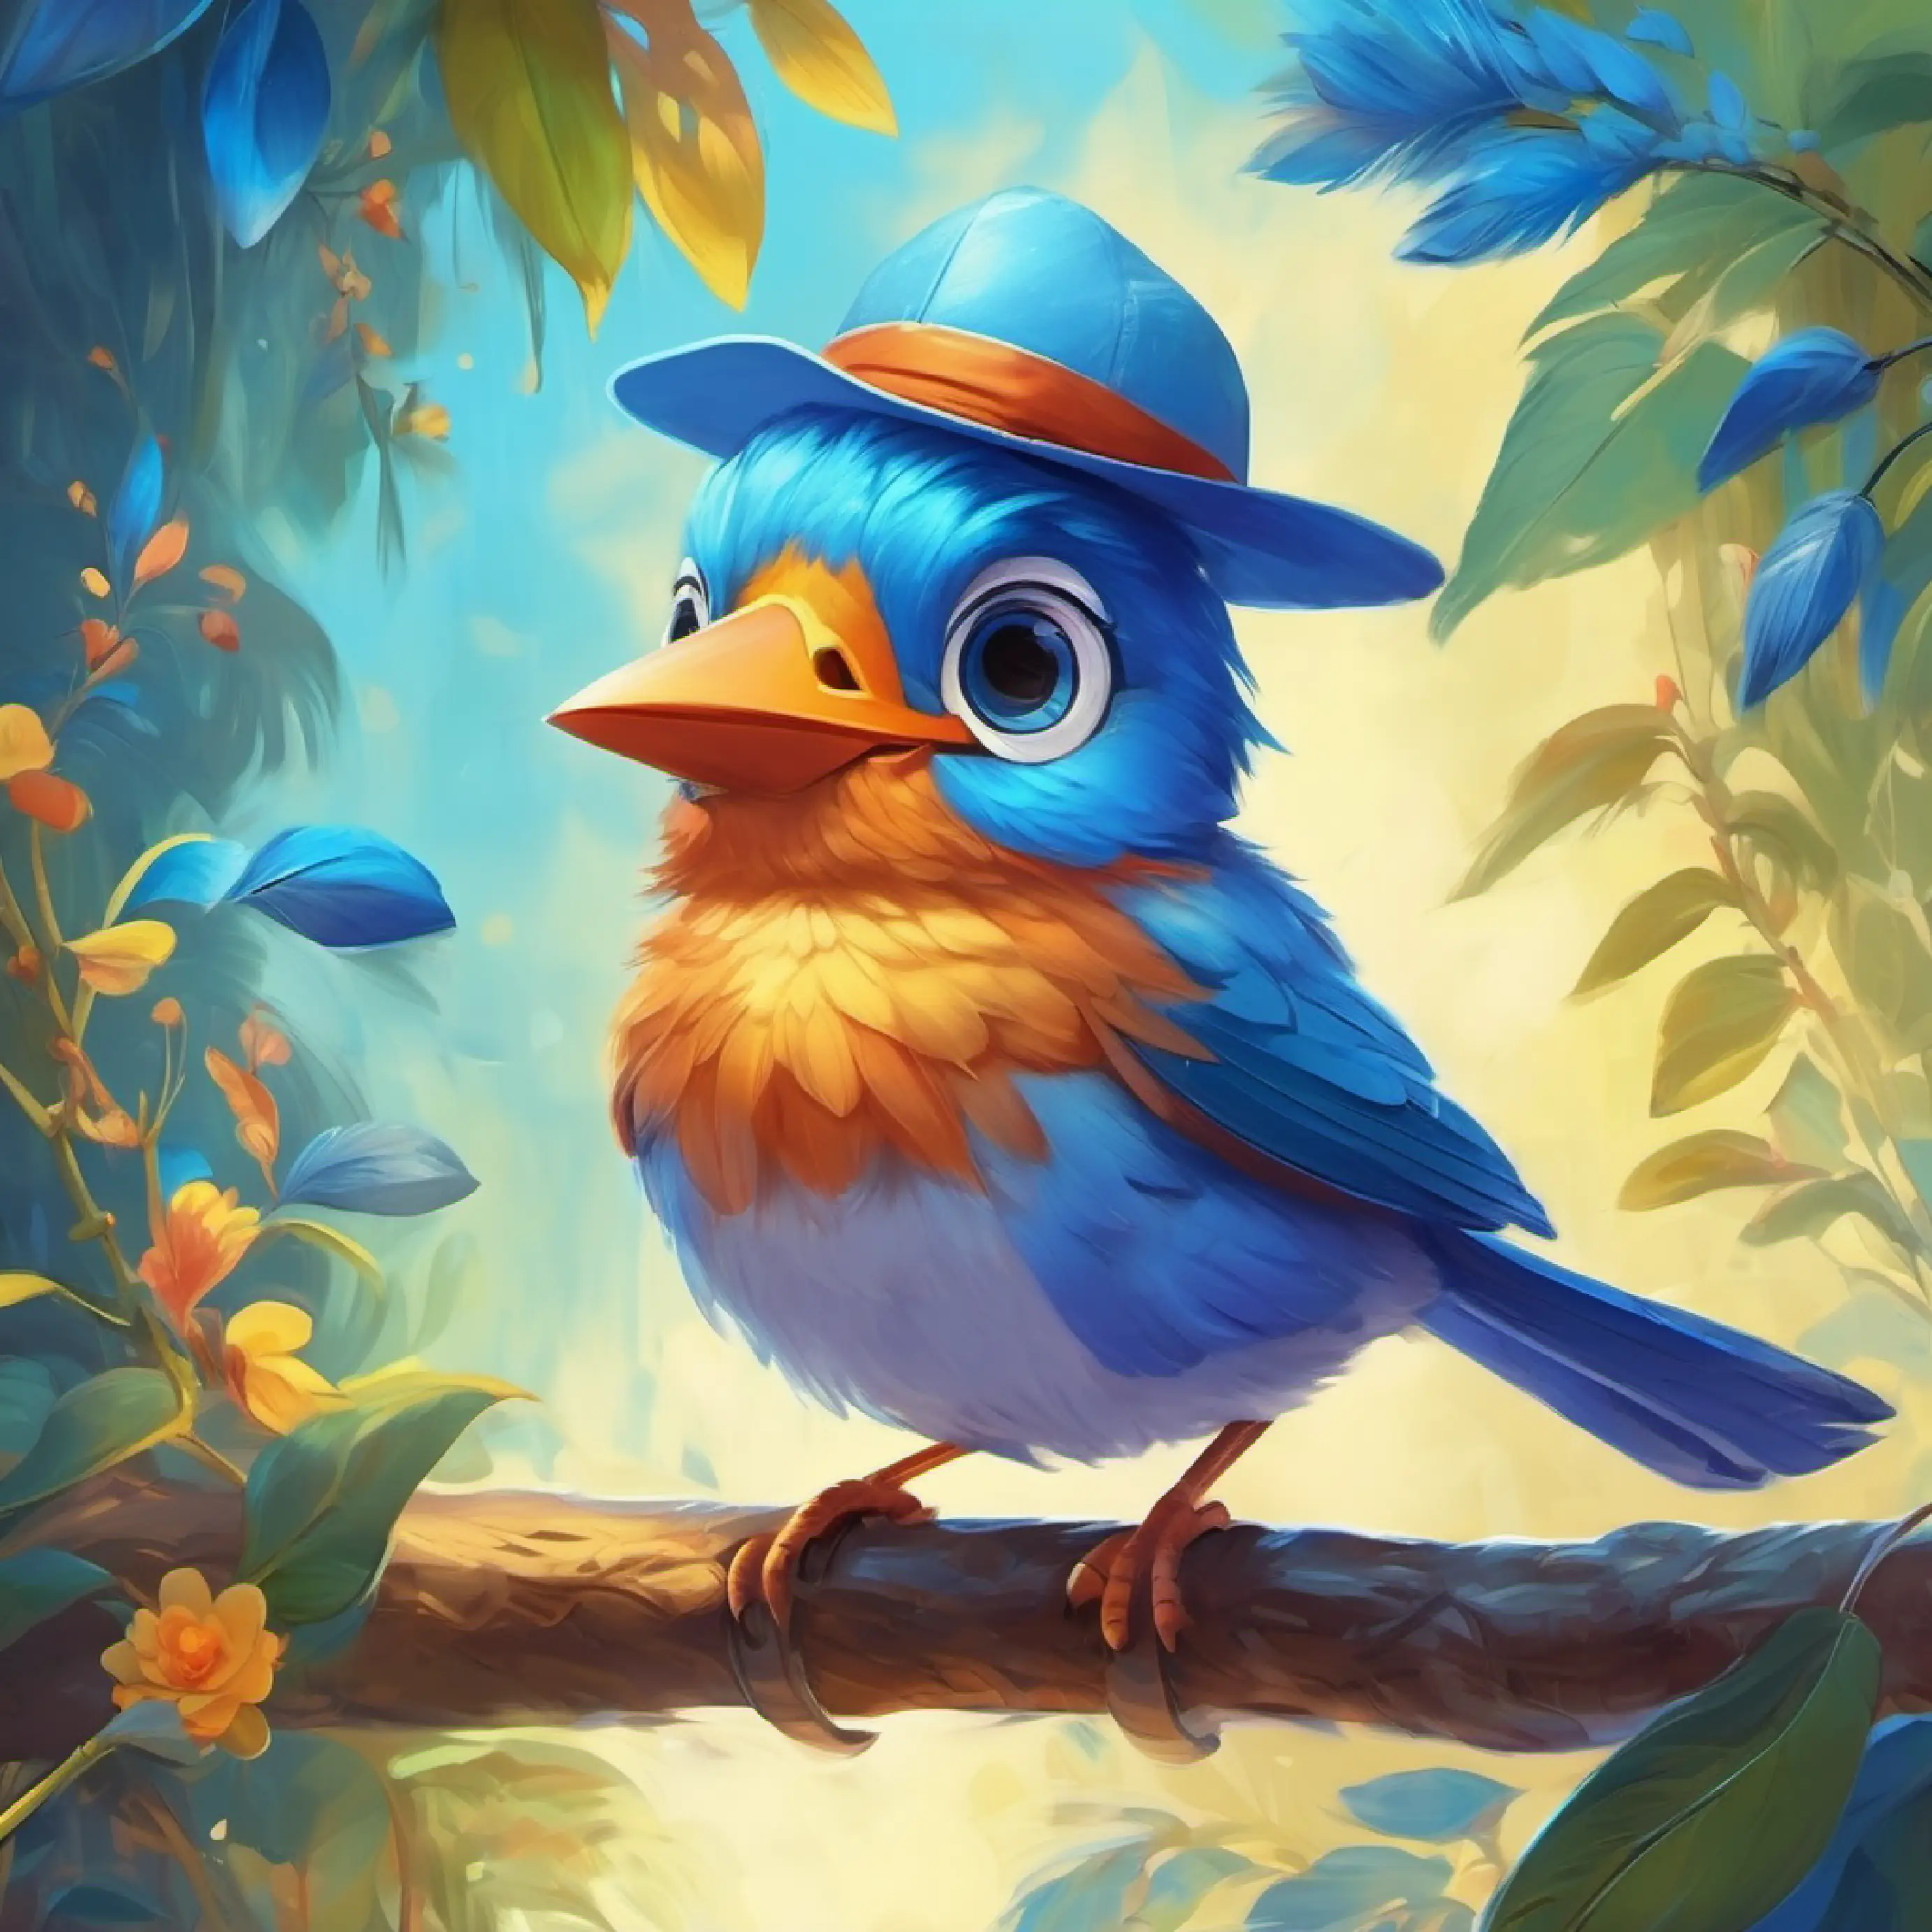 Little bird with bright blue feathers, cheerful hears the worm, who wears glasses and a hat.